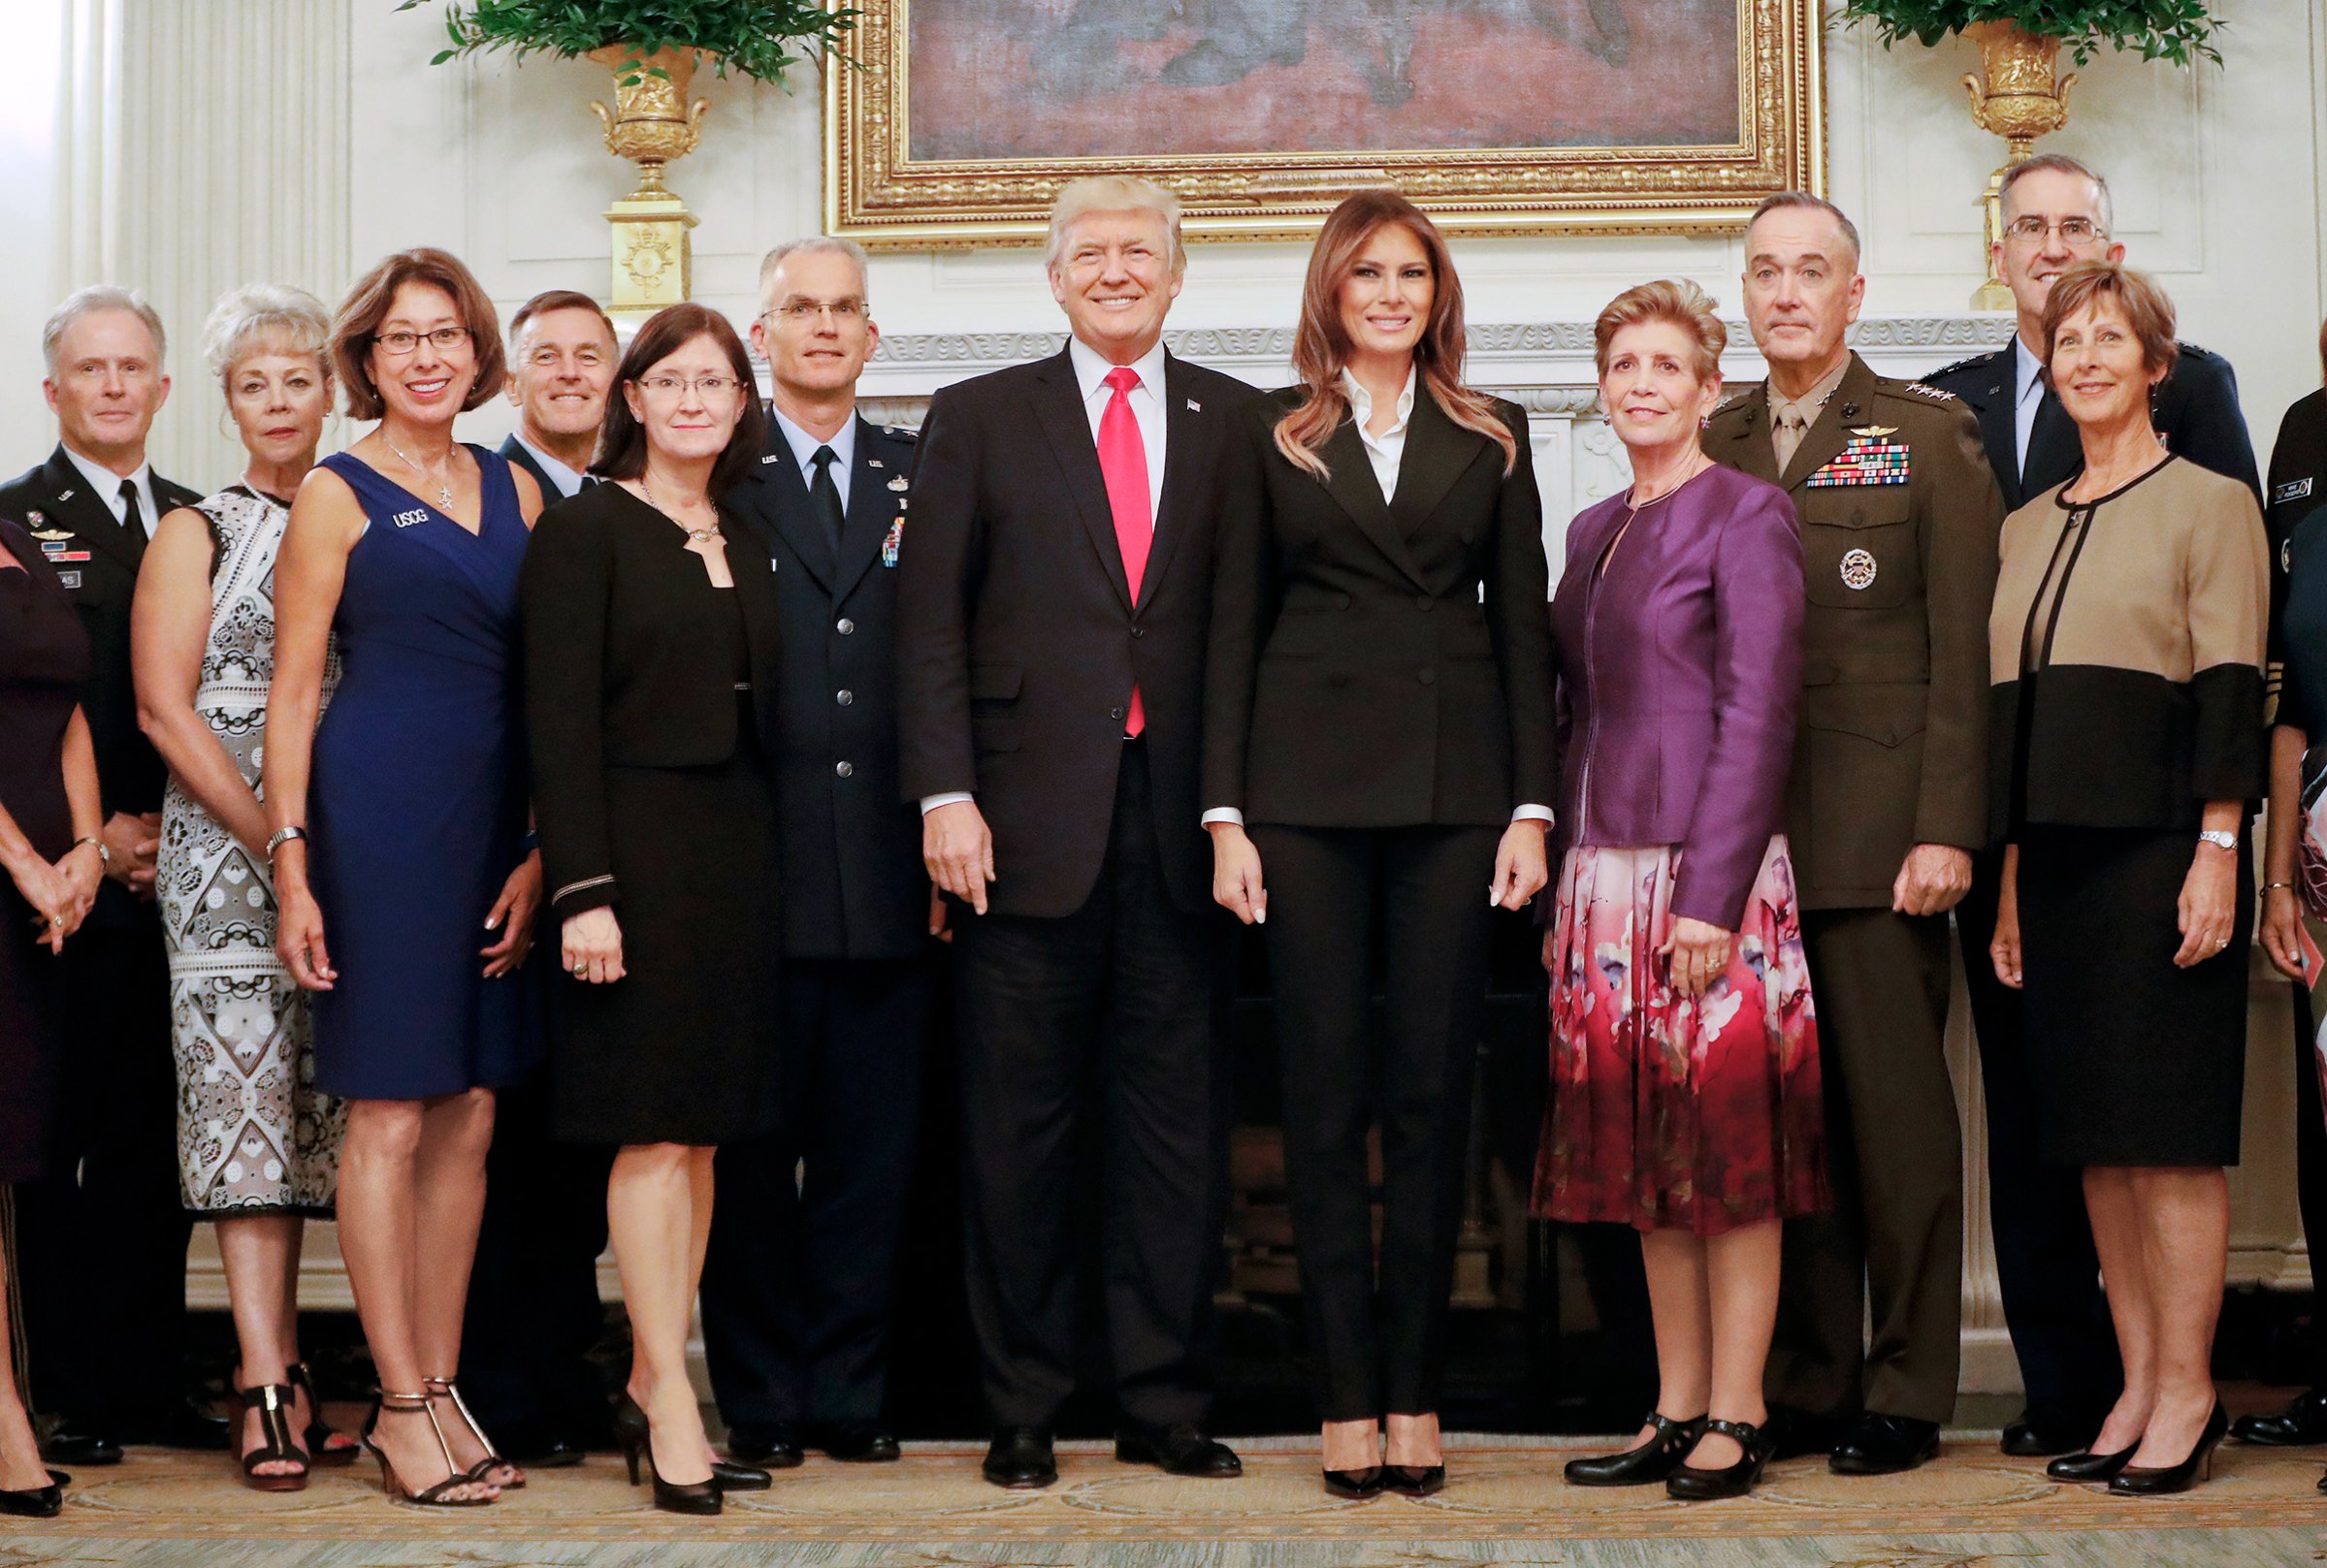 Trump with top U.S. military officials and their spouses